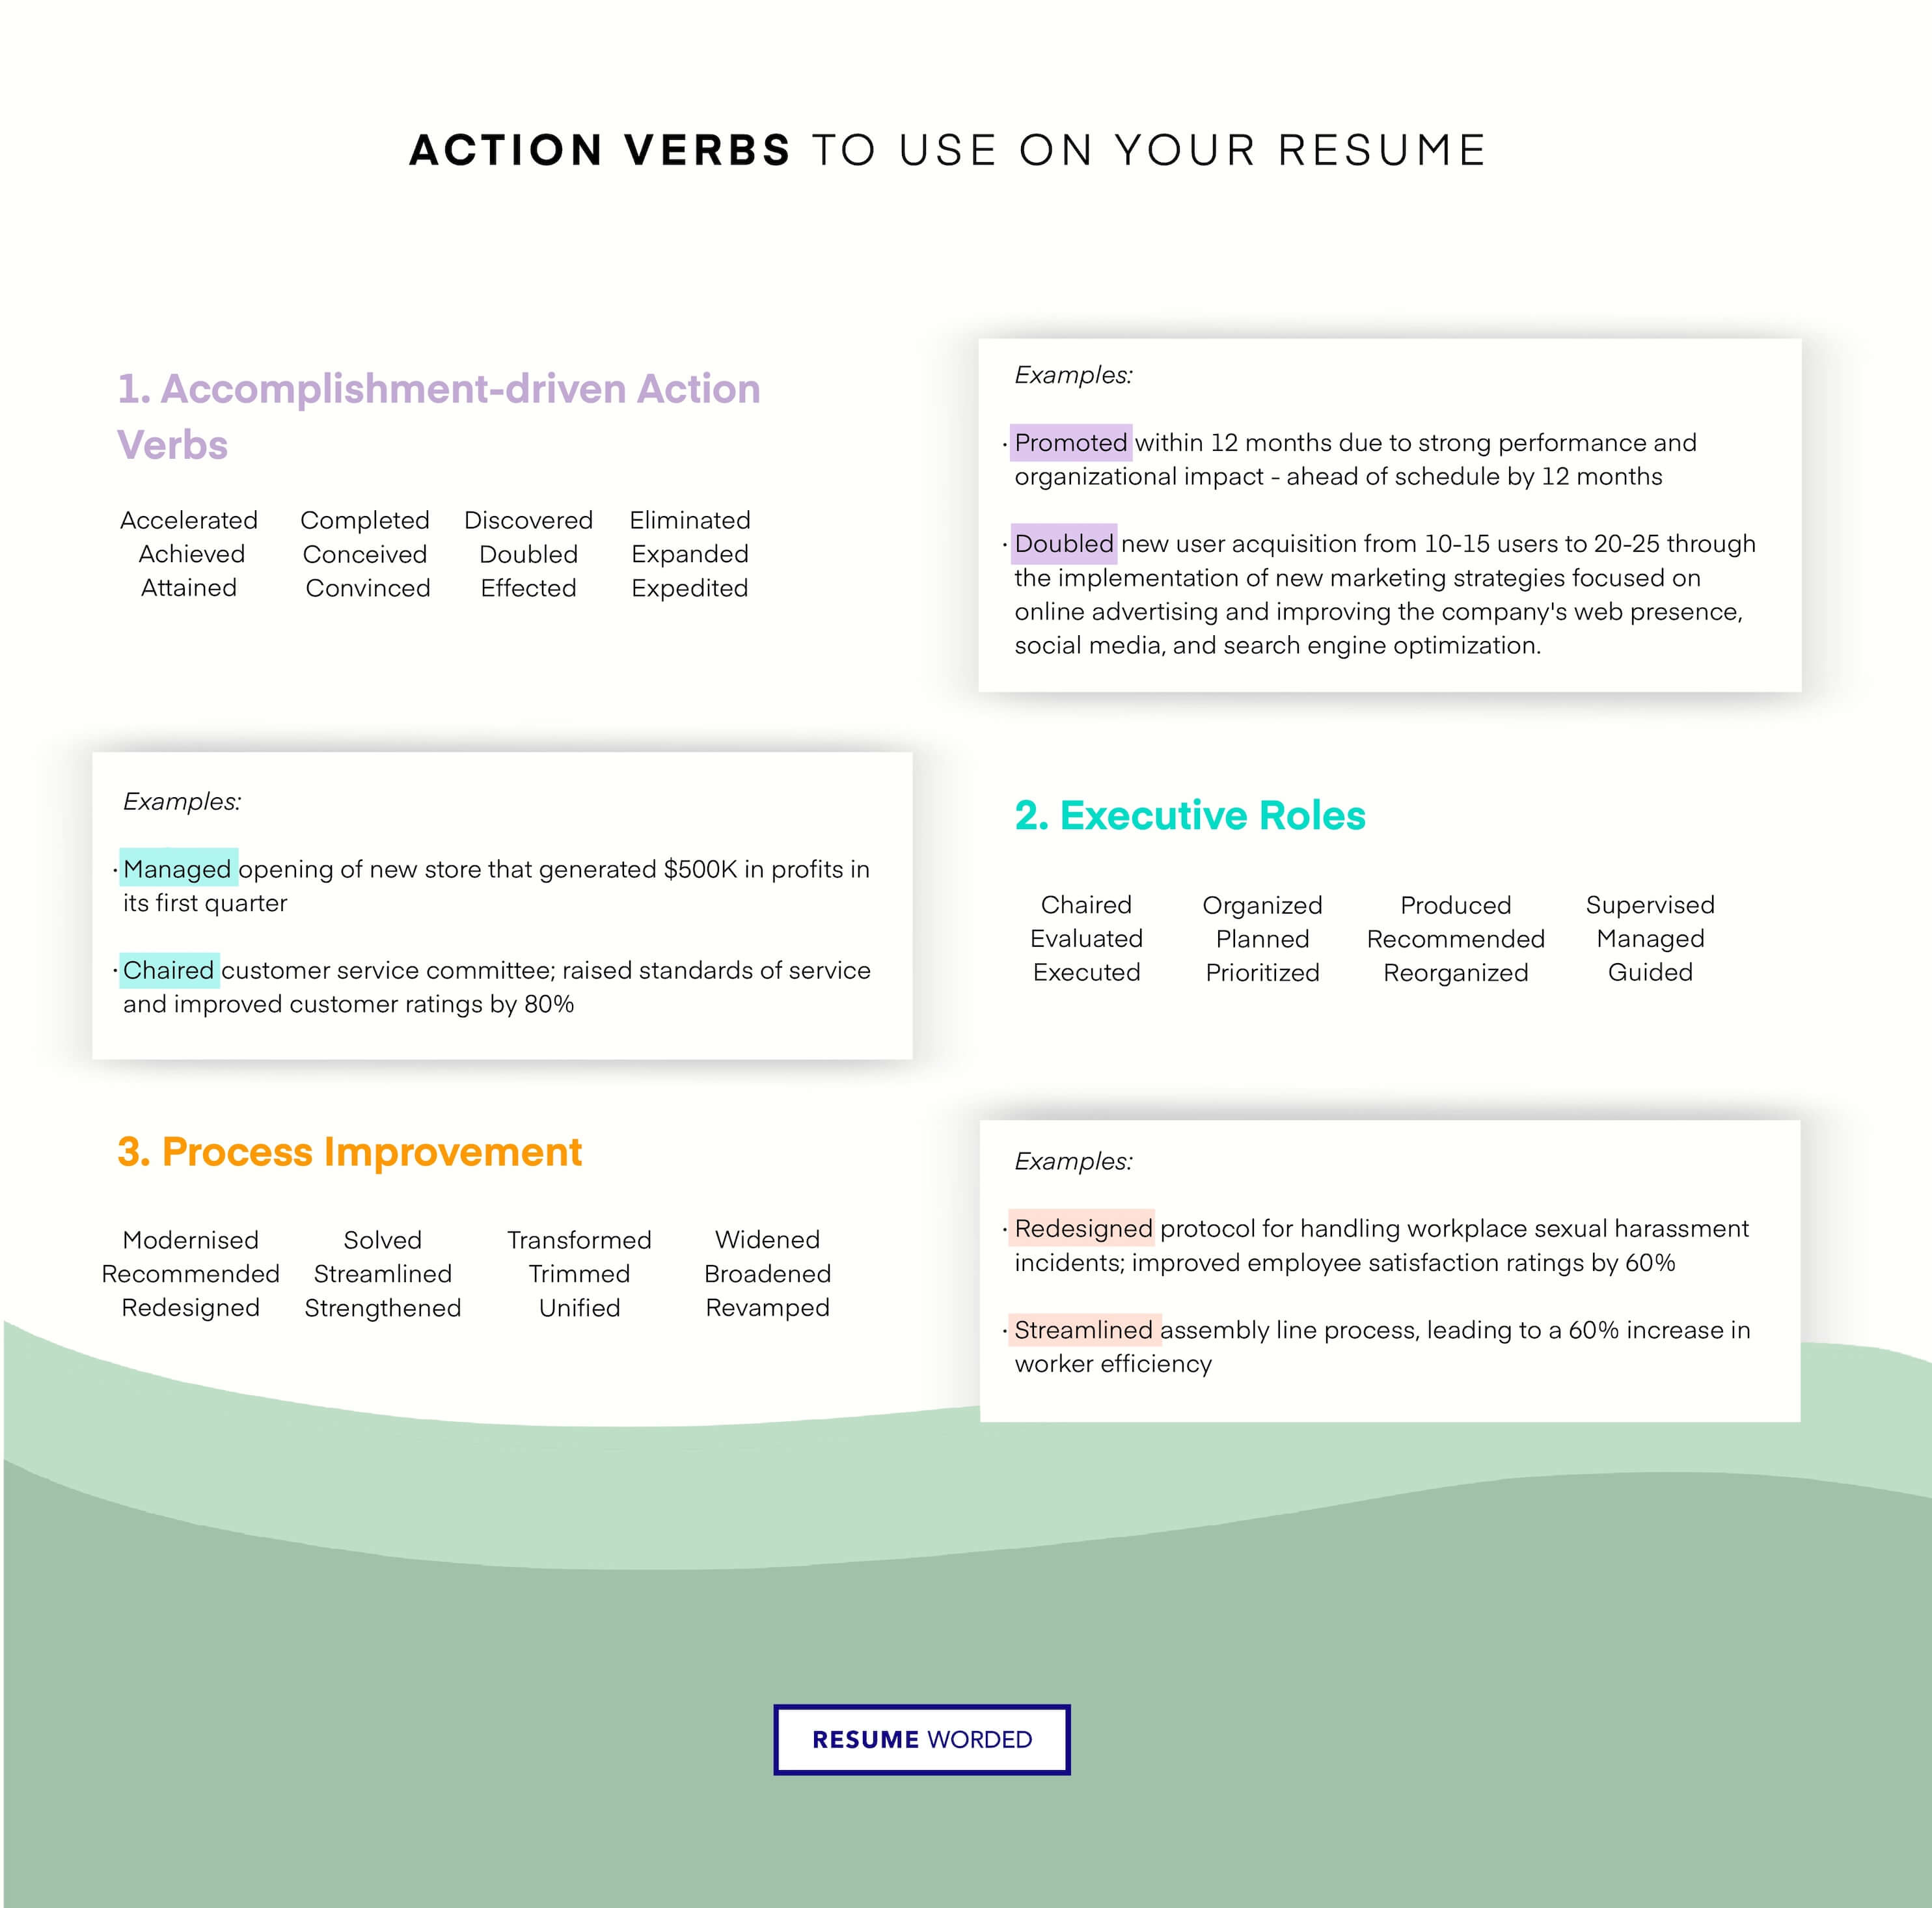 Use action verbs to show experience in multiple functions. - Facilities Director Resume